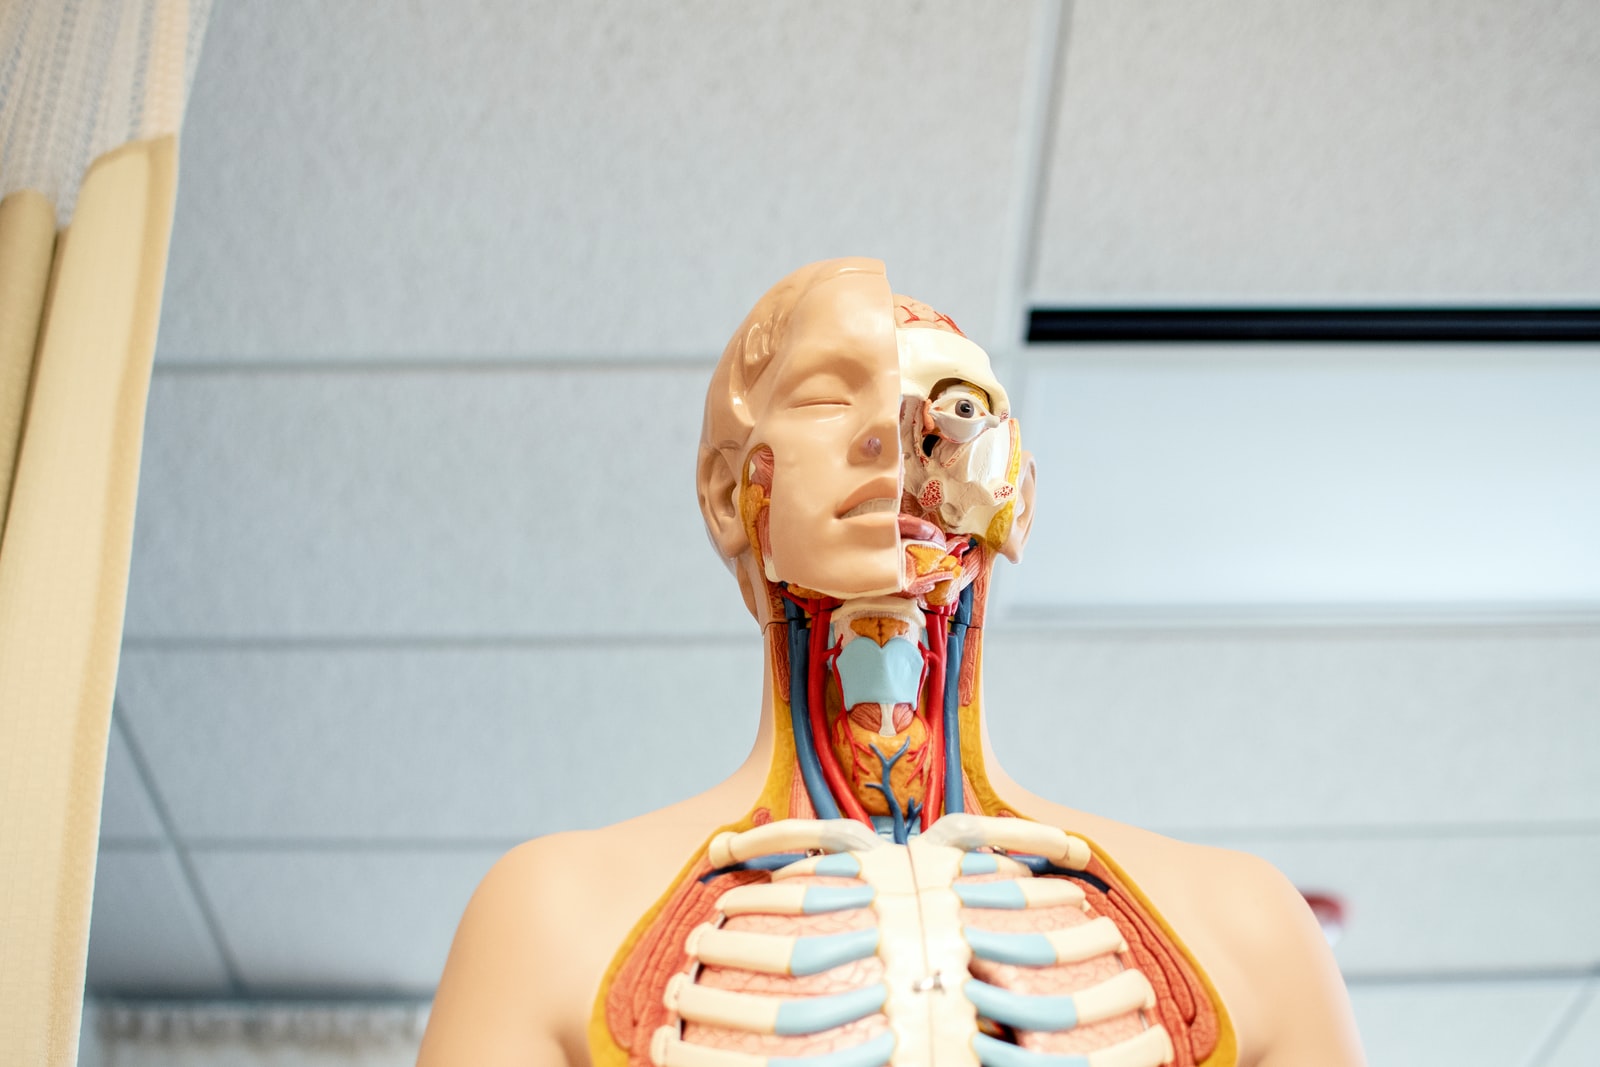 Is anatomy and physiology hard? Can You Fail NCLEX with 75 Questions?